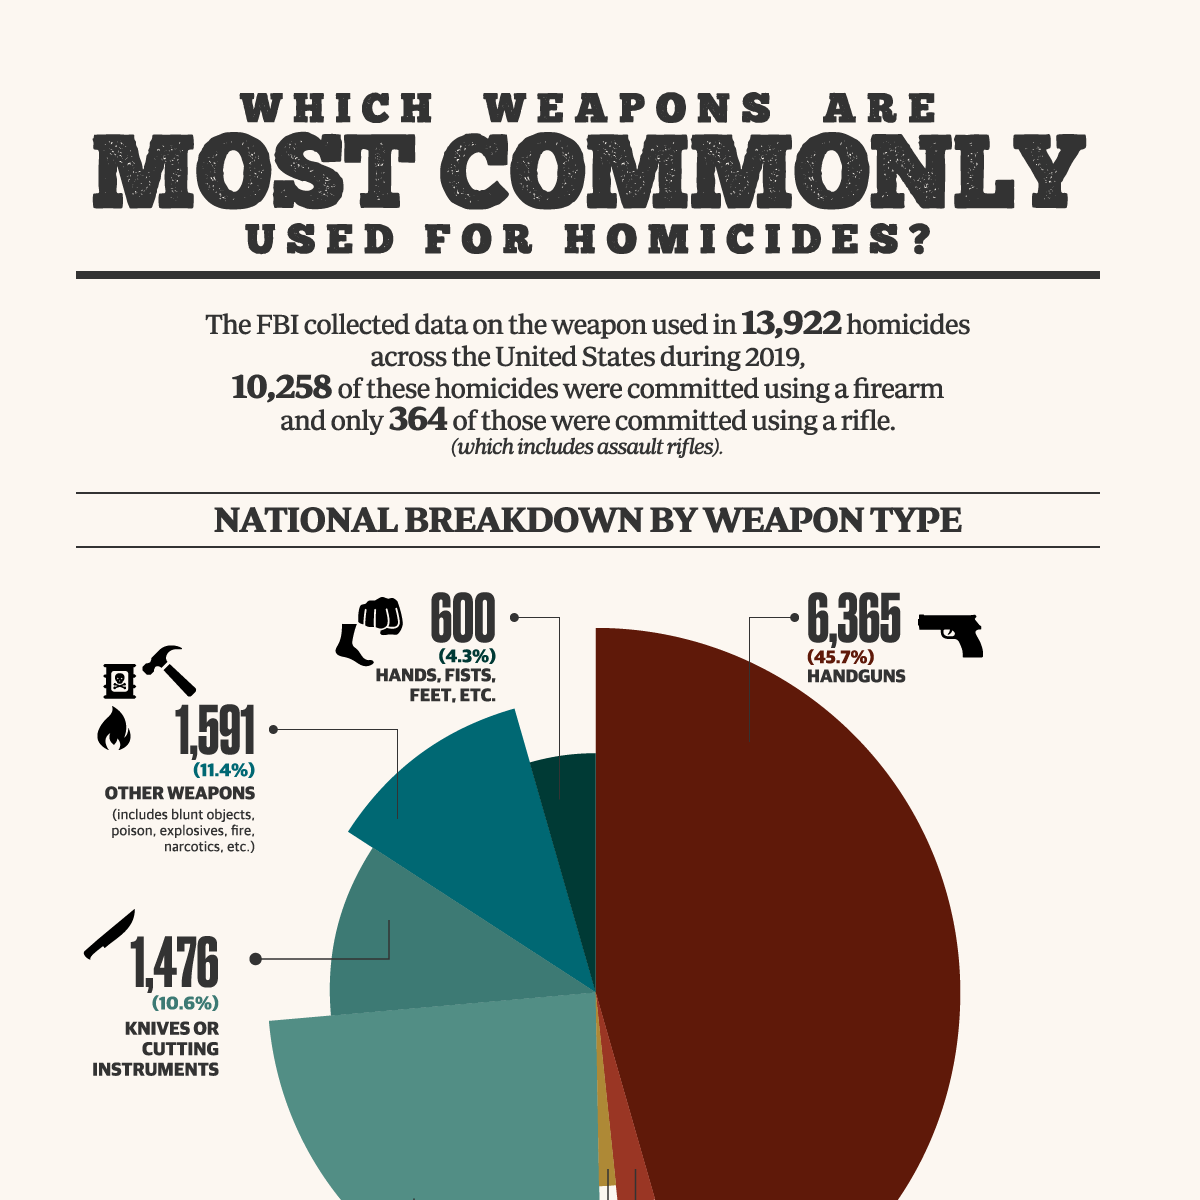 weapons-commonly-used-homicides_thumb.png